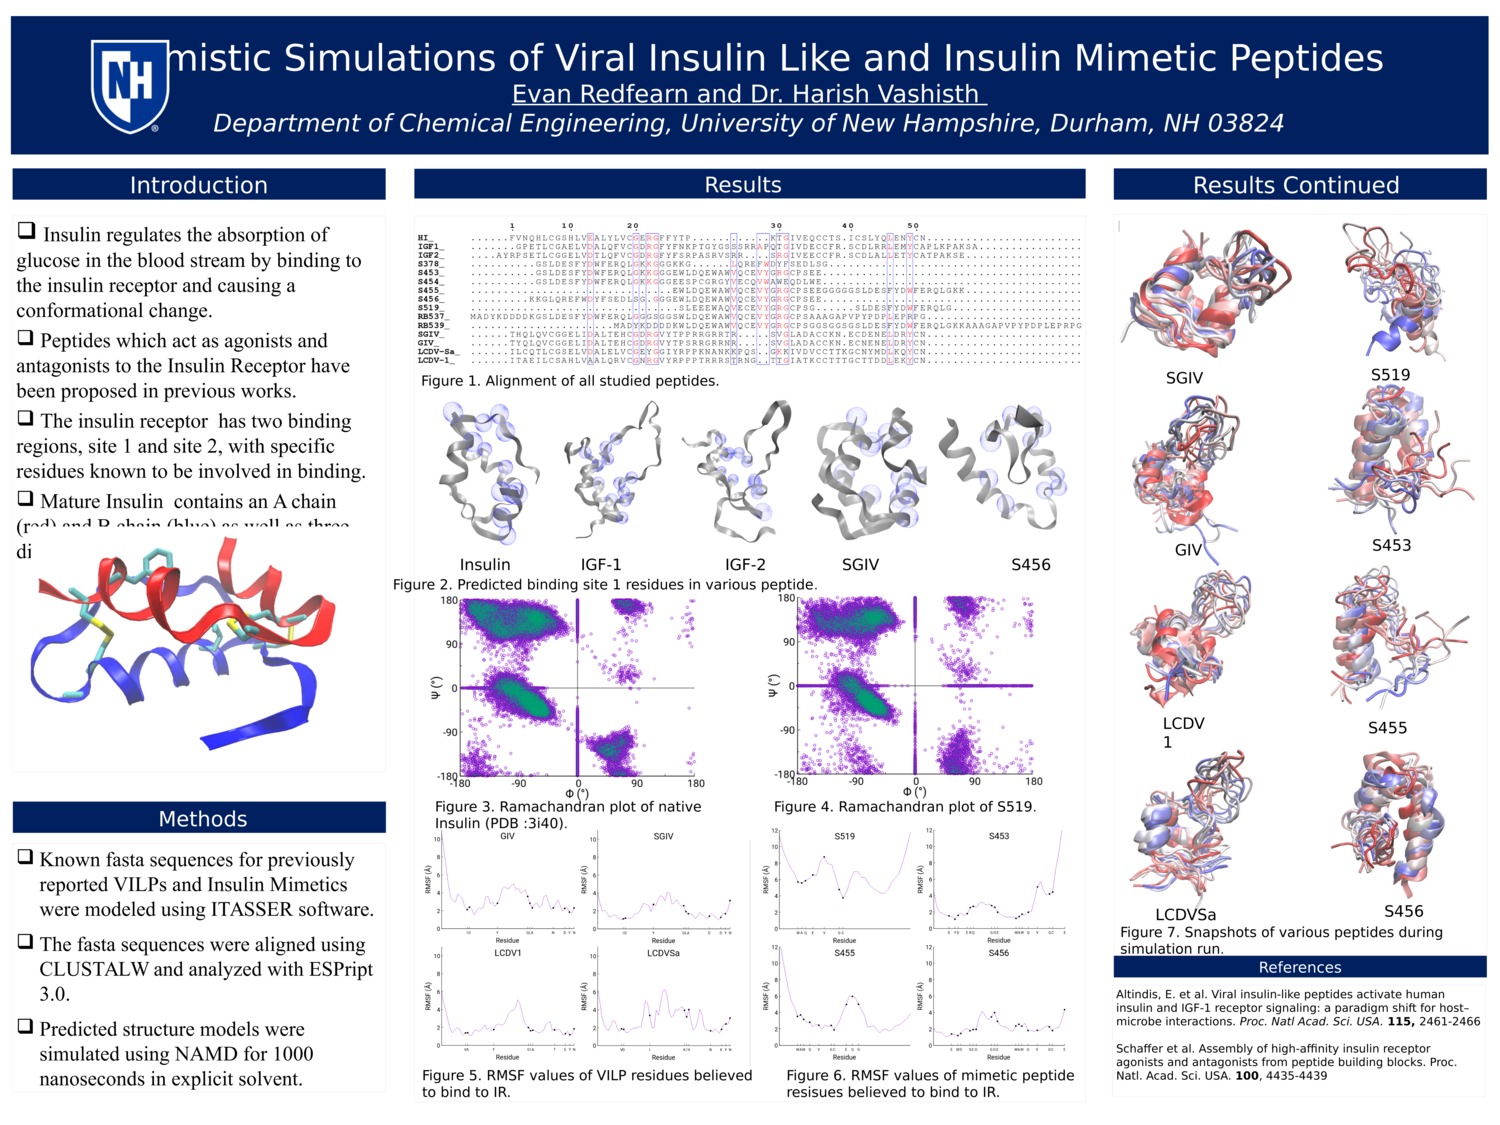 Atomistic Simulations Of Viral Insulin Like And Insulin Mimetic Peptides by esr1001